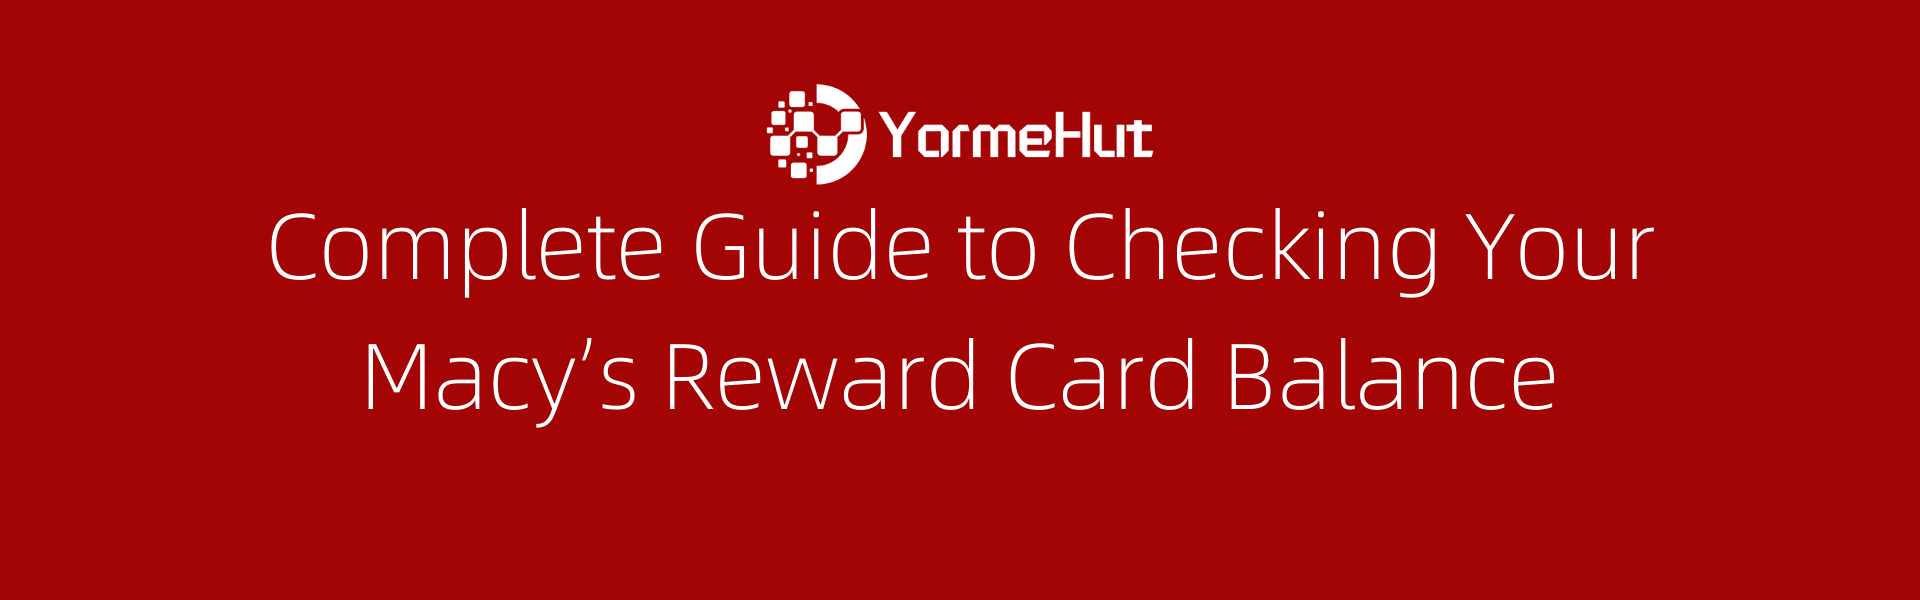 Complete Guide to Checking Your Macy’s Reward Card Balance